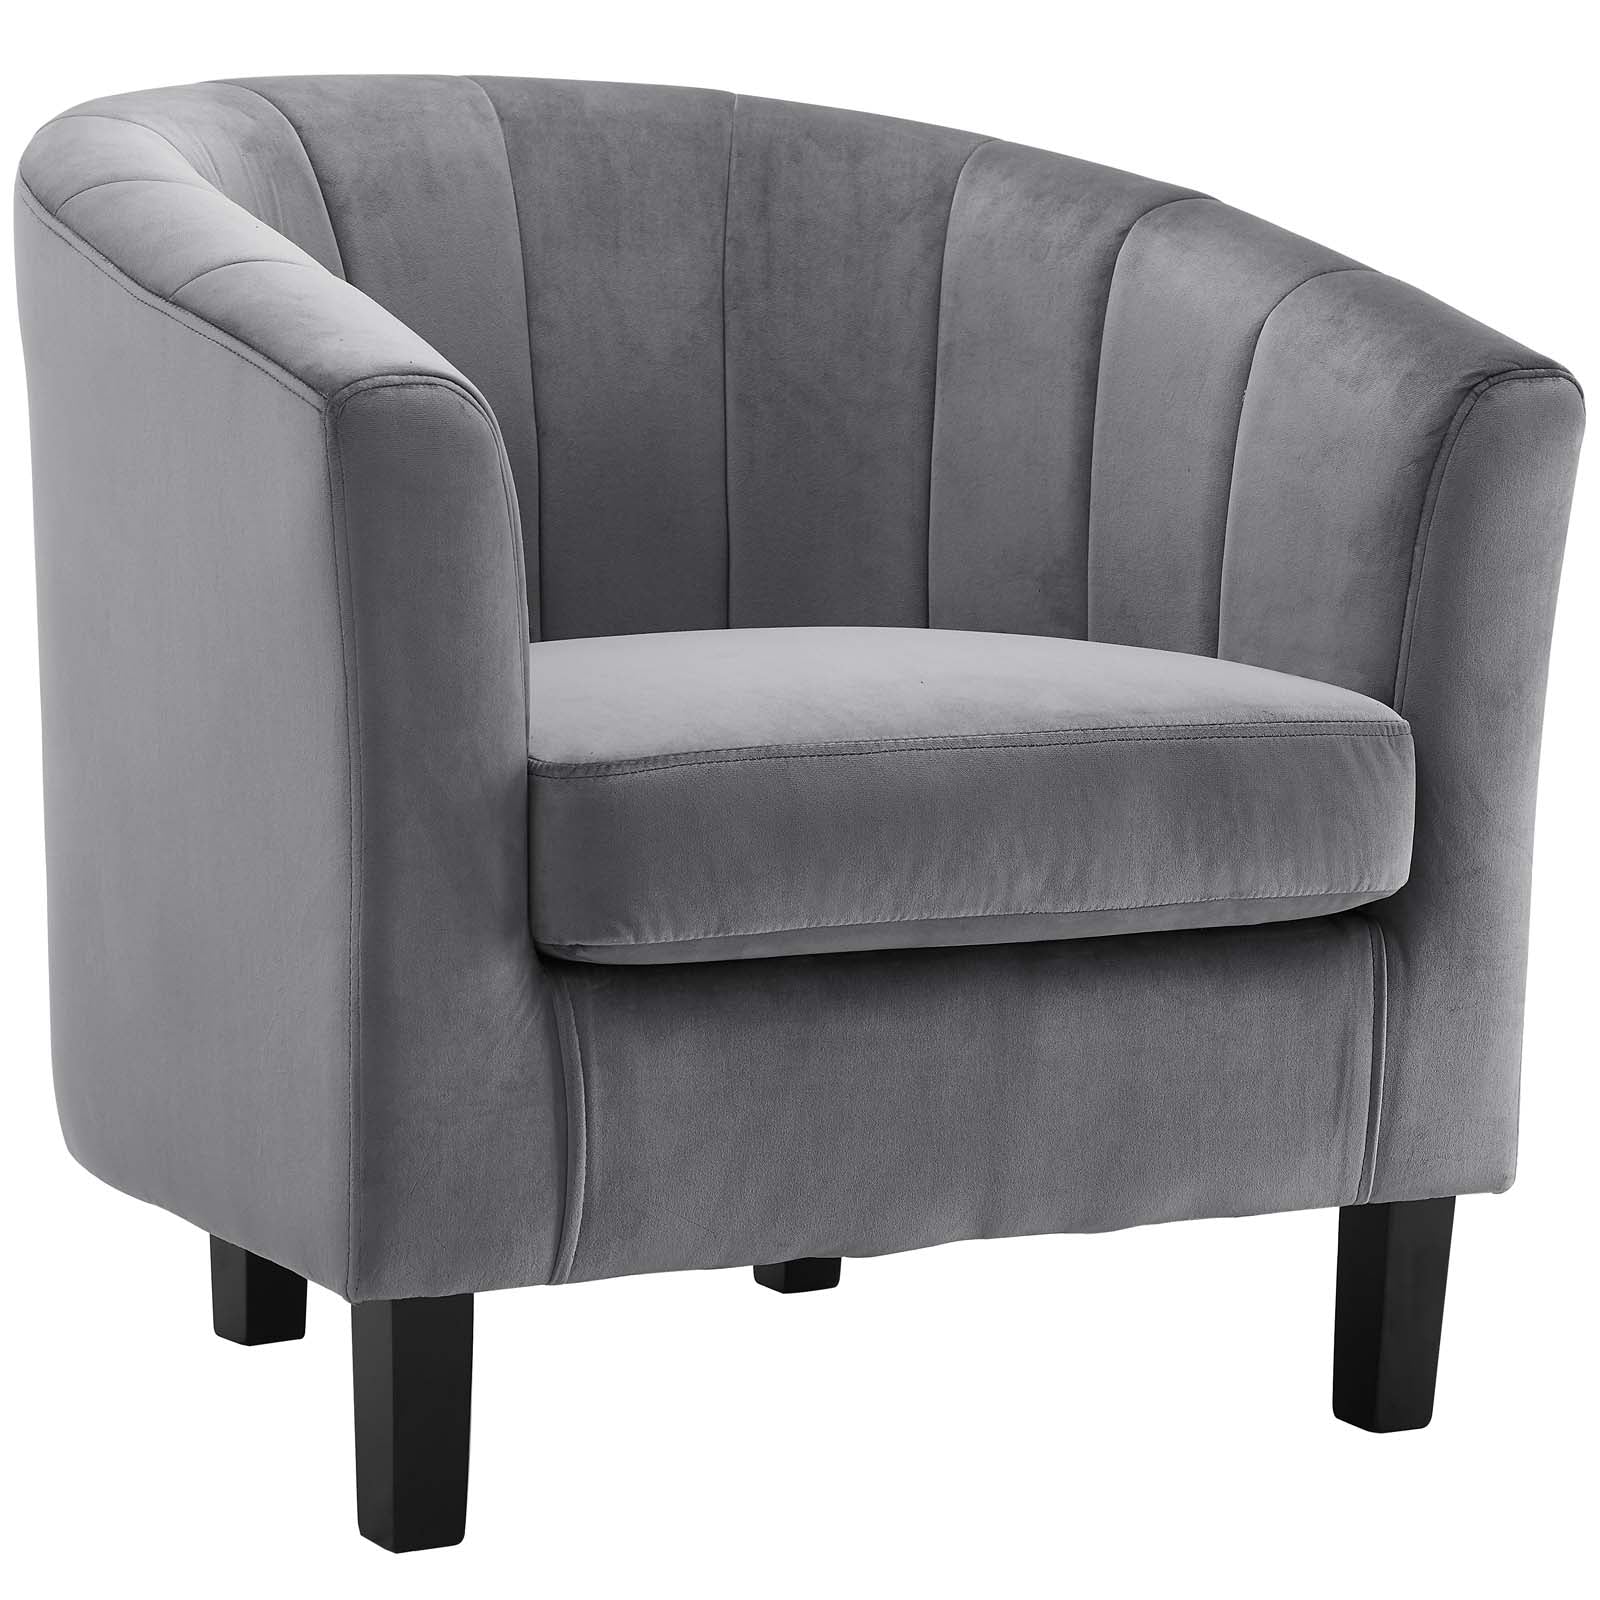 Modway Living Room Sets - Prospect Channel Tufted Performance Velvet Loveseat and Armchair Set Gray